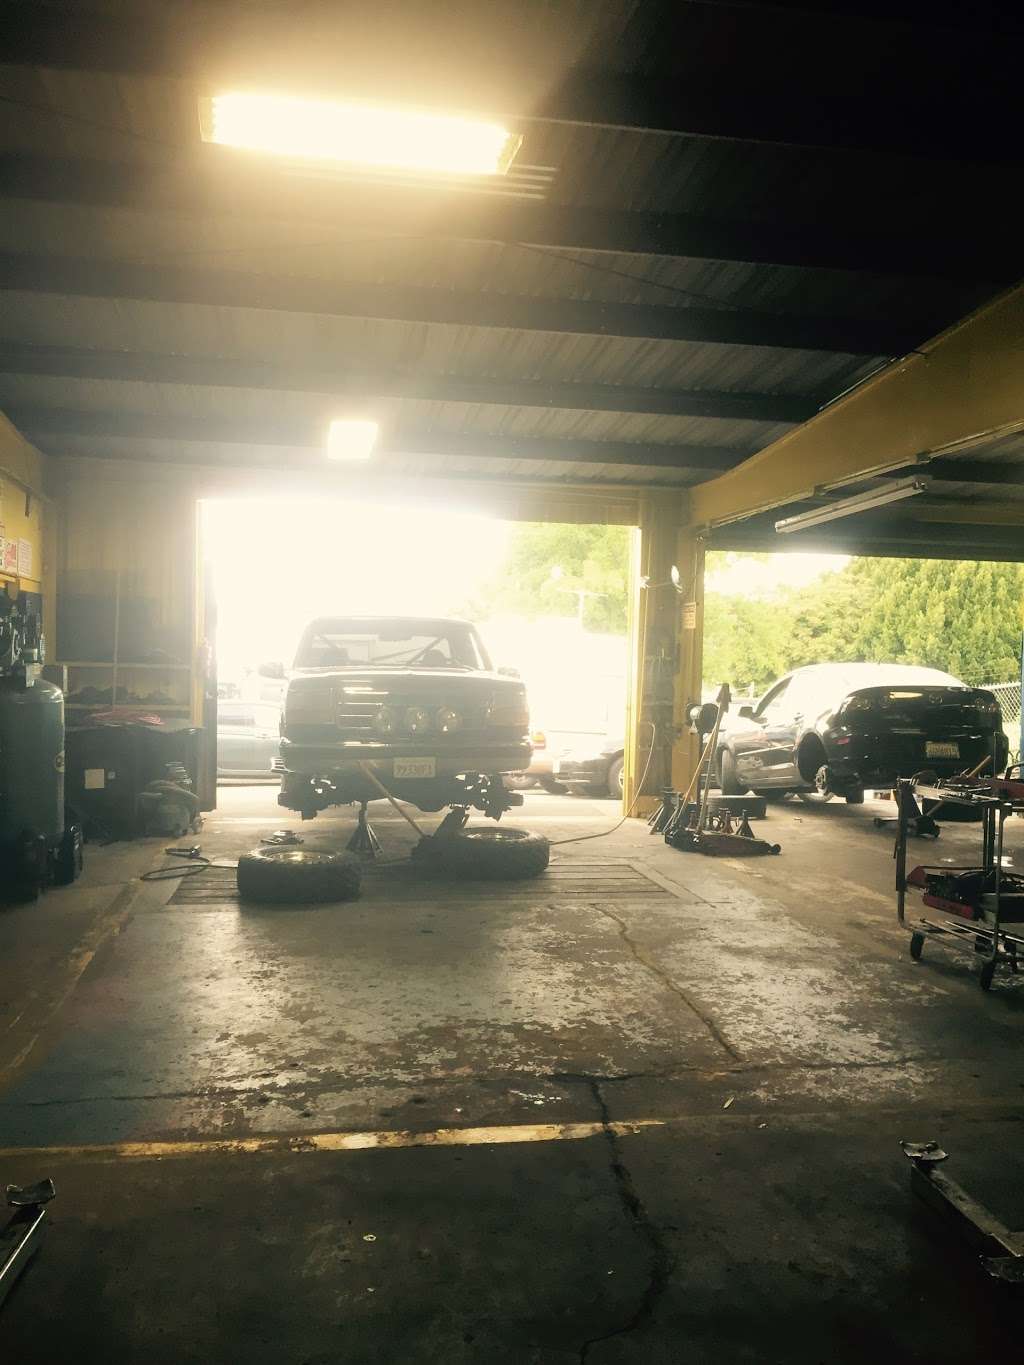 C. General Complete Auto Service | 2919 Sweetwater Rd, Spring Valley, CA 91977, USA | Phone: (619) 697-1474